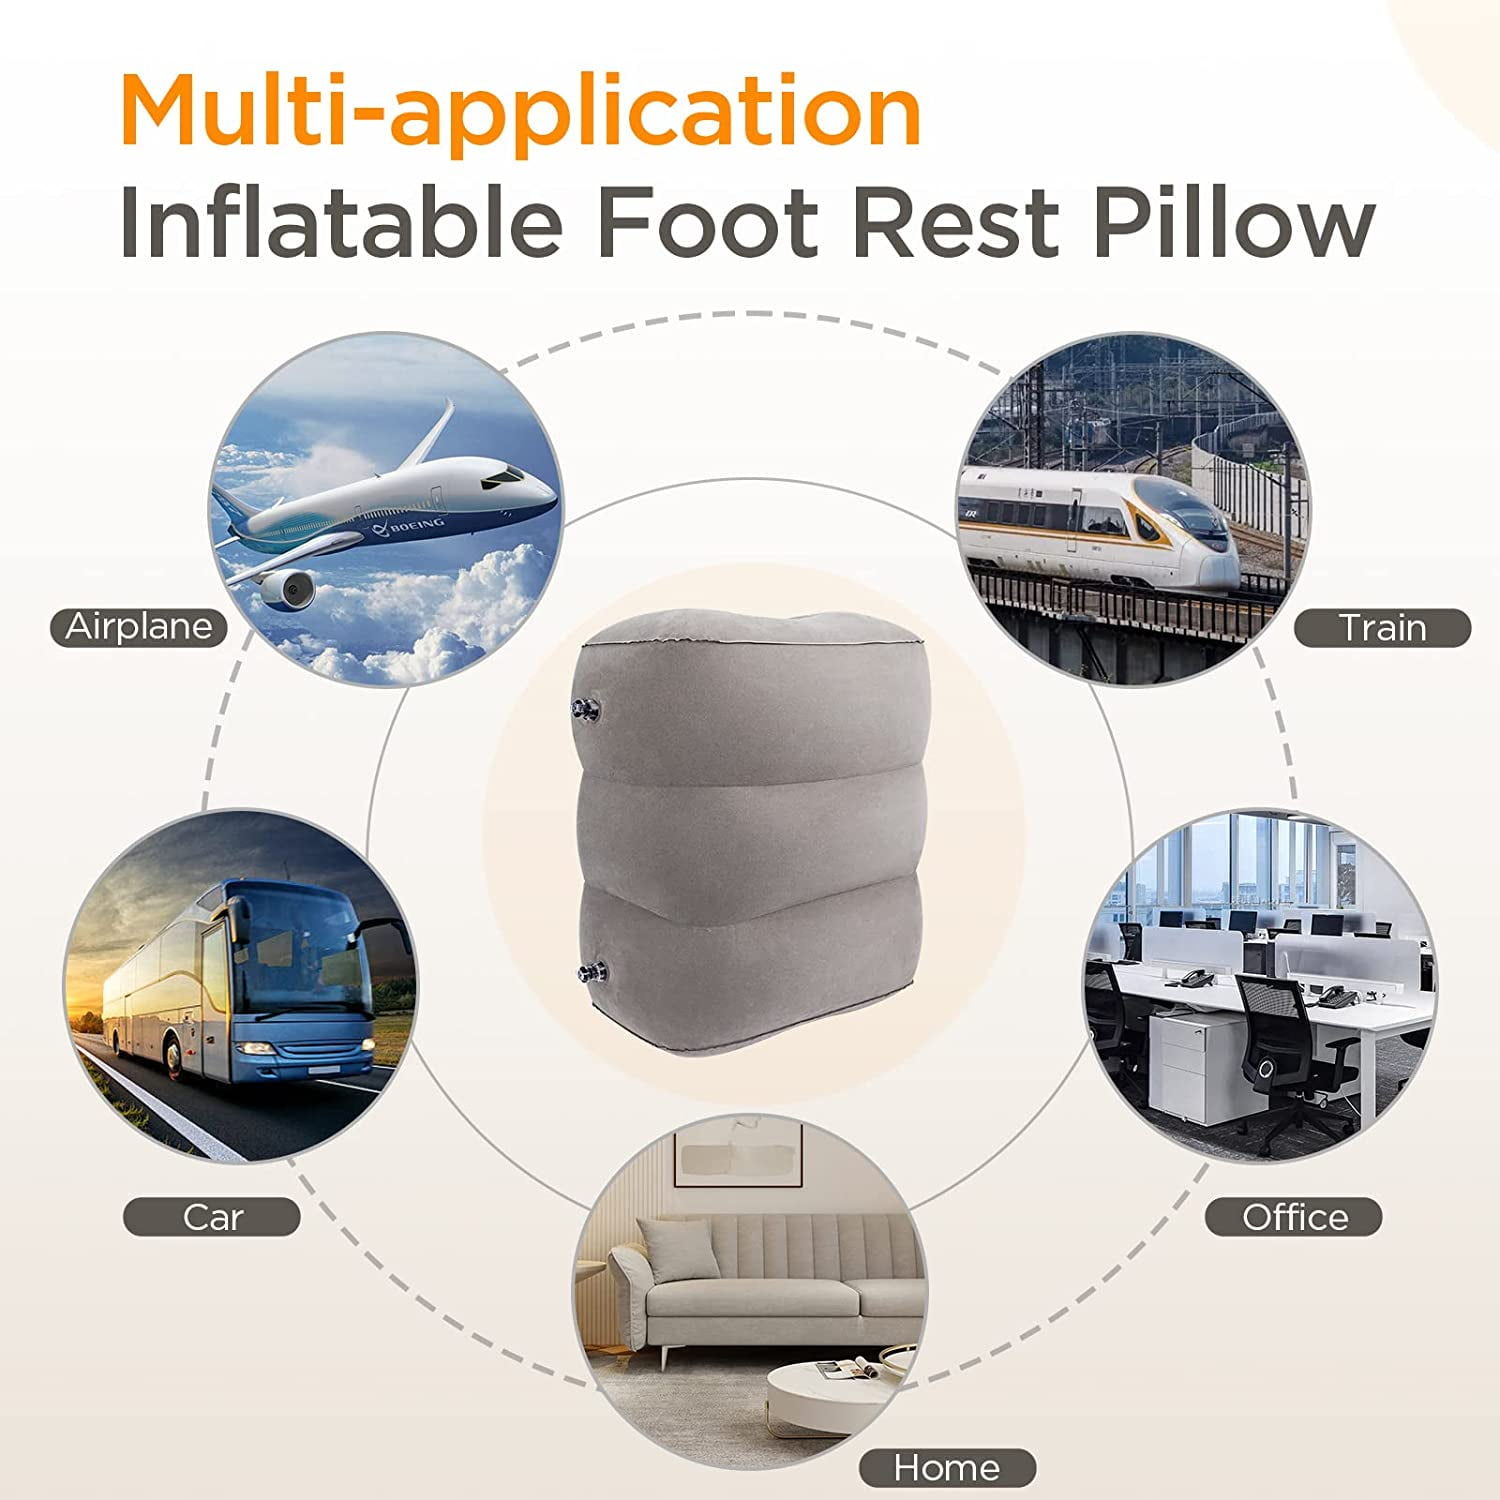 Xtra-Comfort Inflatable Foot Rest - Ottoman Cushion Support Pillow for Office de